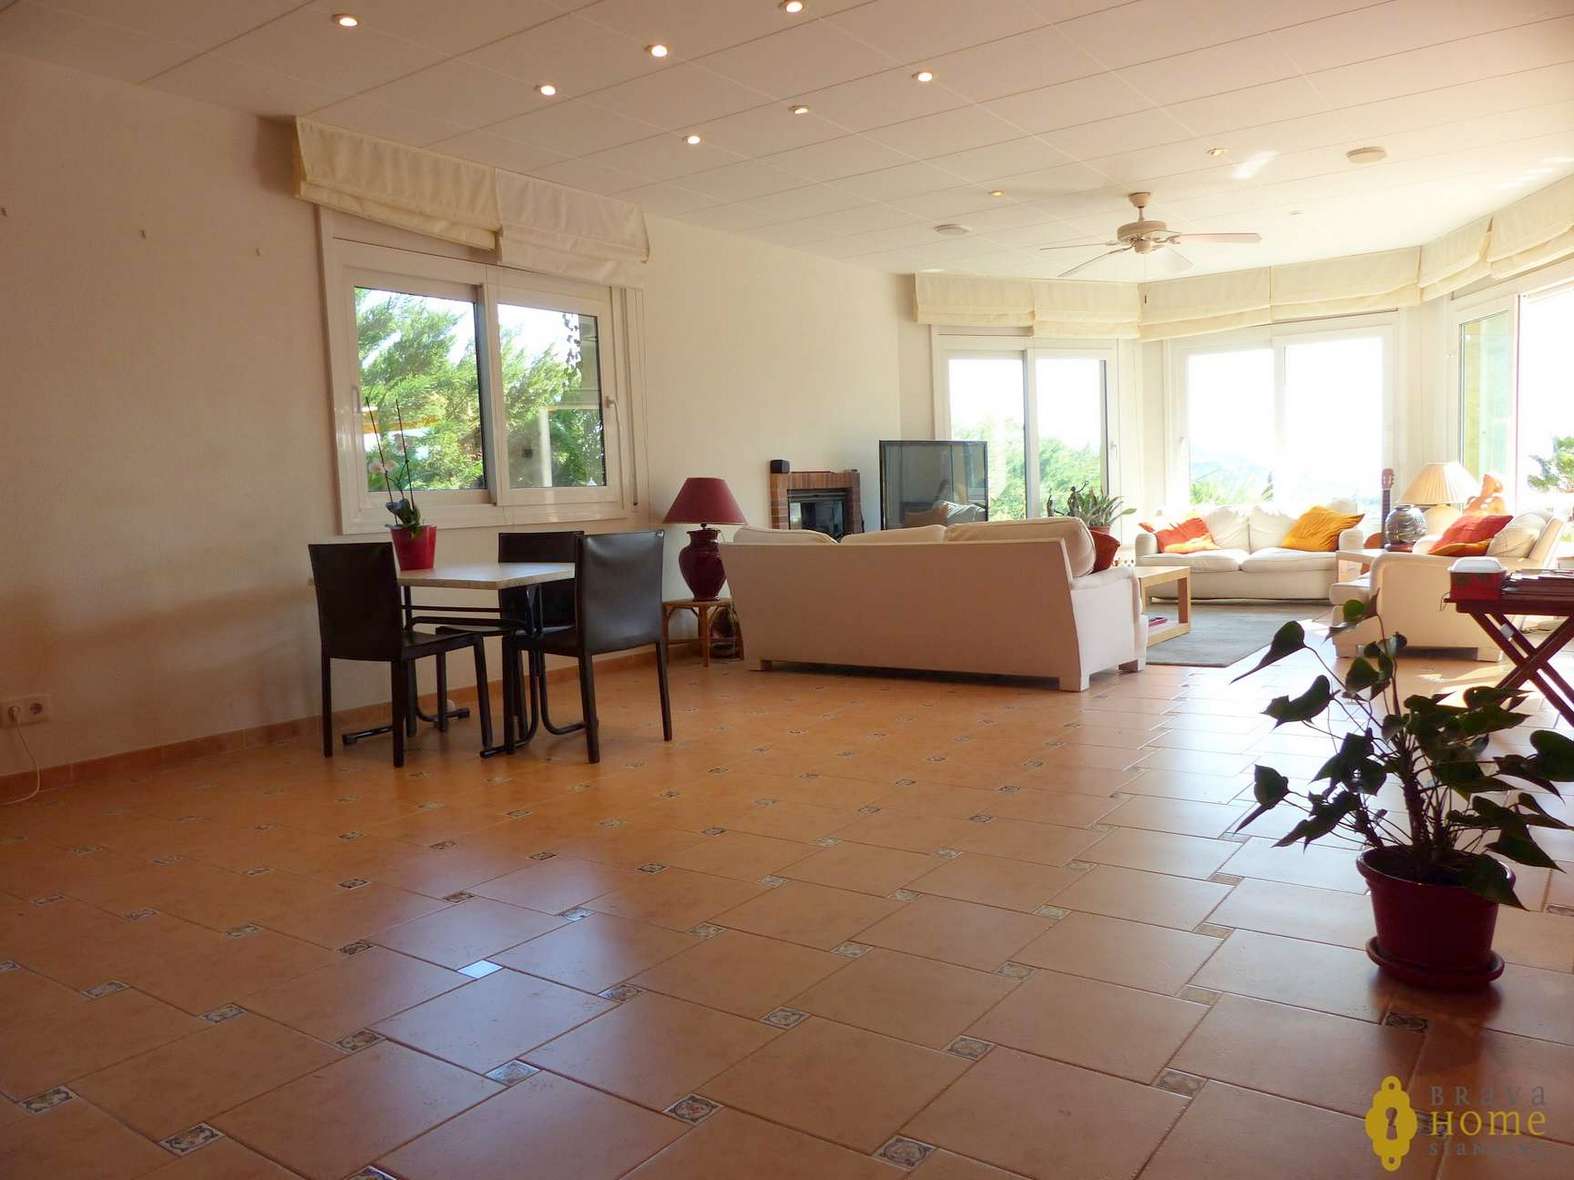 Superb villa with sea view for sale in Rosas - Mas Fumat